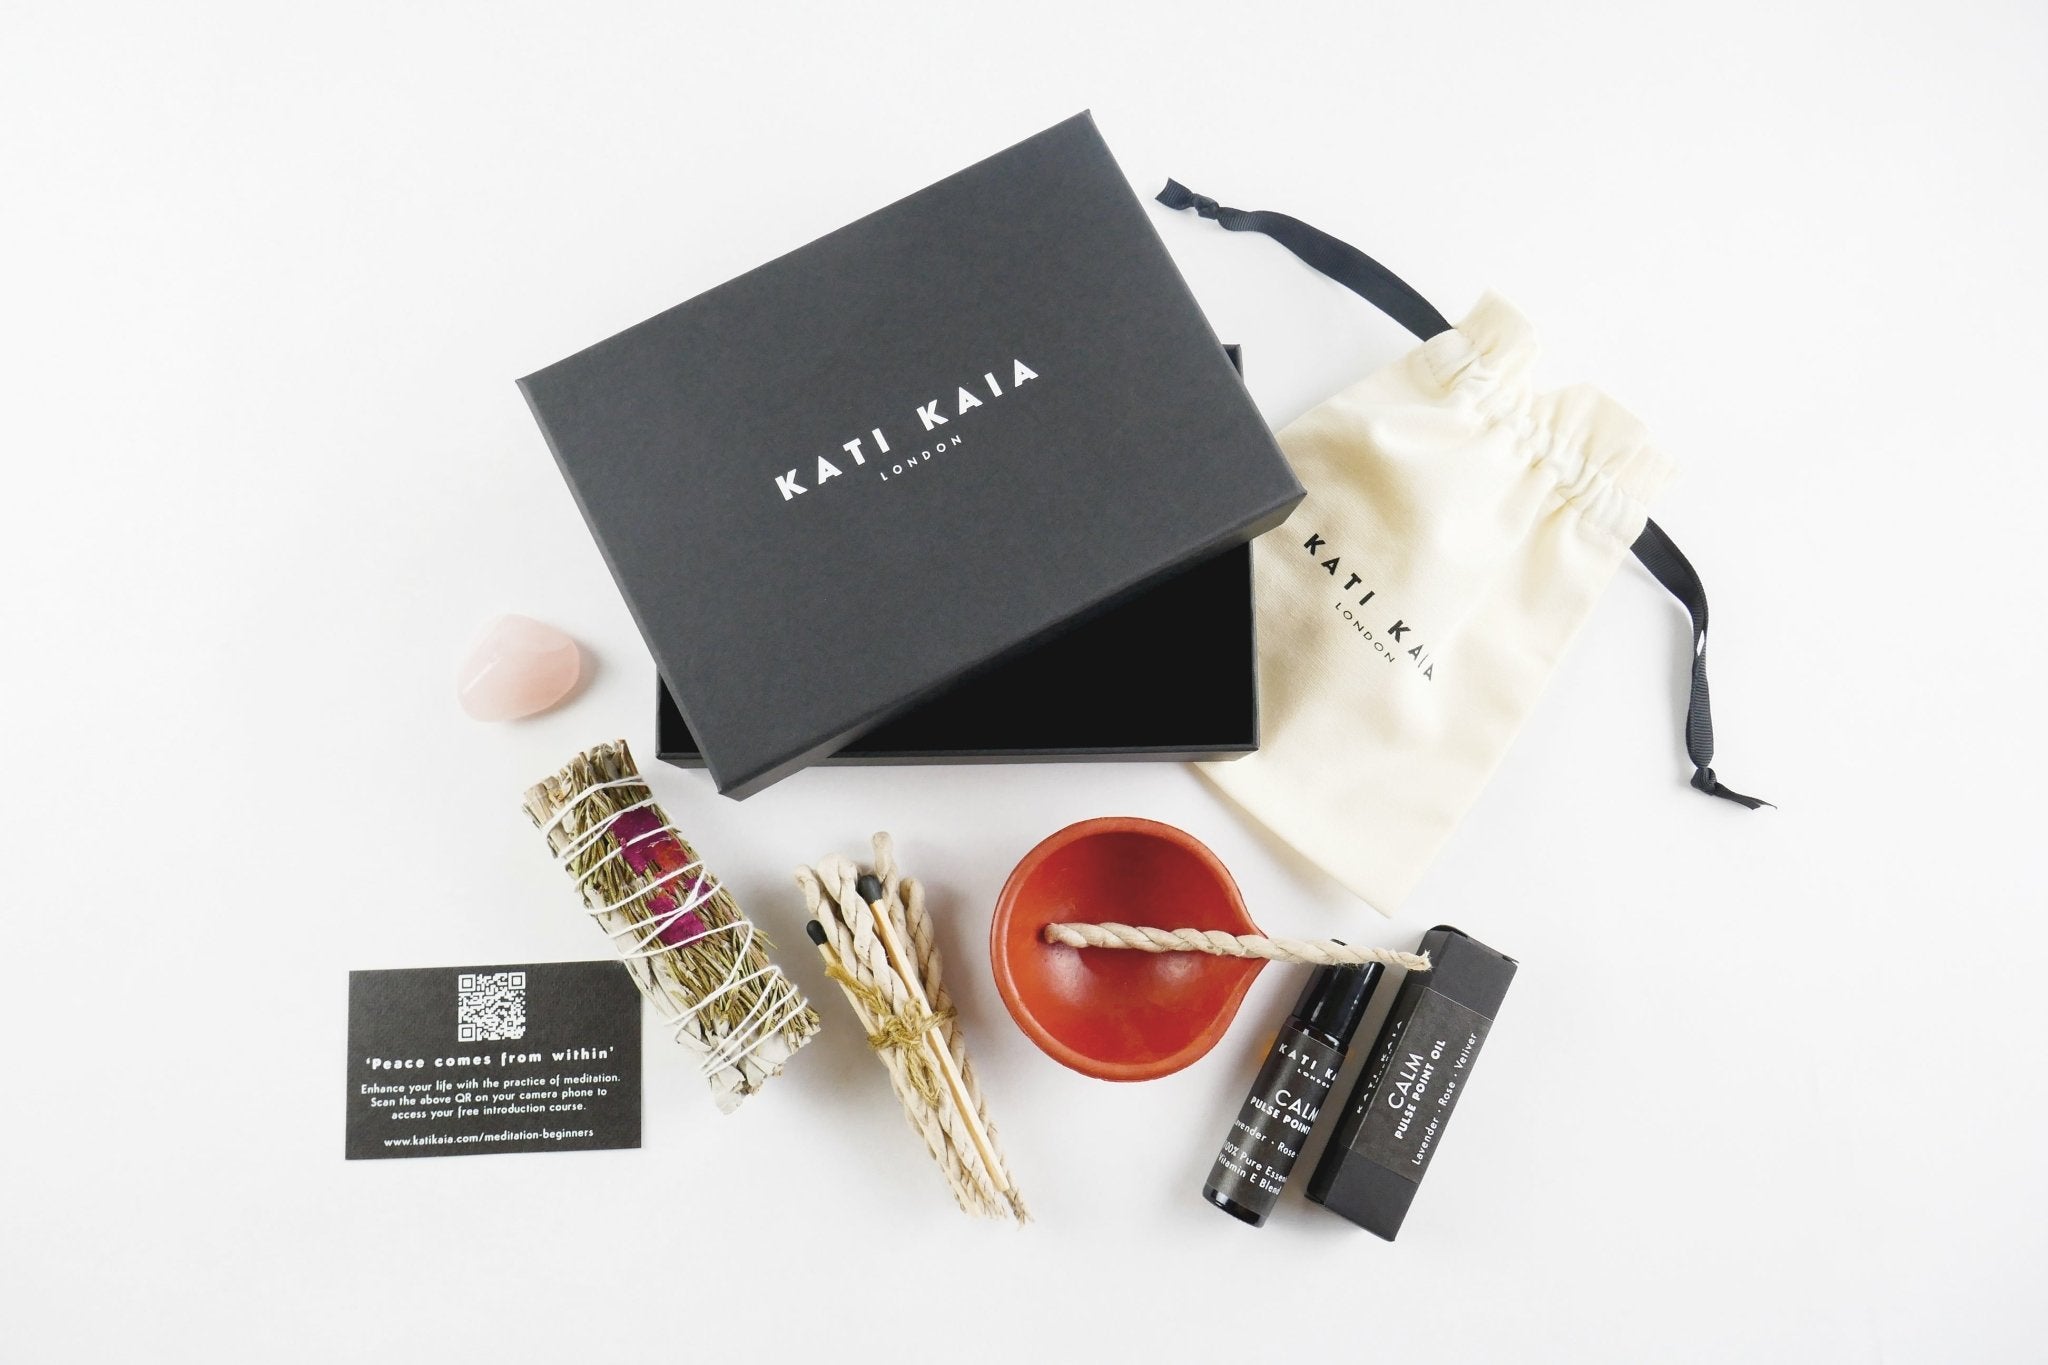 Corporate Meditation Gifts & Kits. Find your perfect corporate gifts for workers to help them inspire, calmer and clearer.